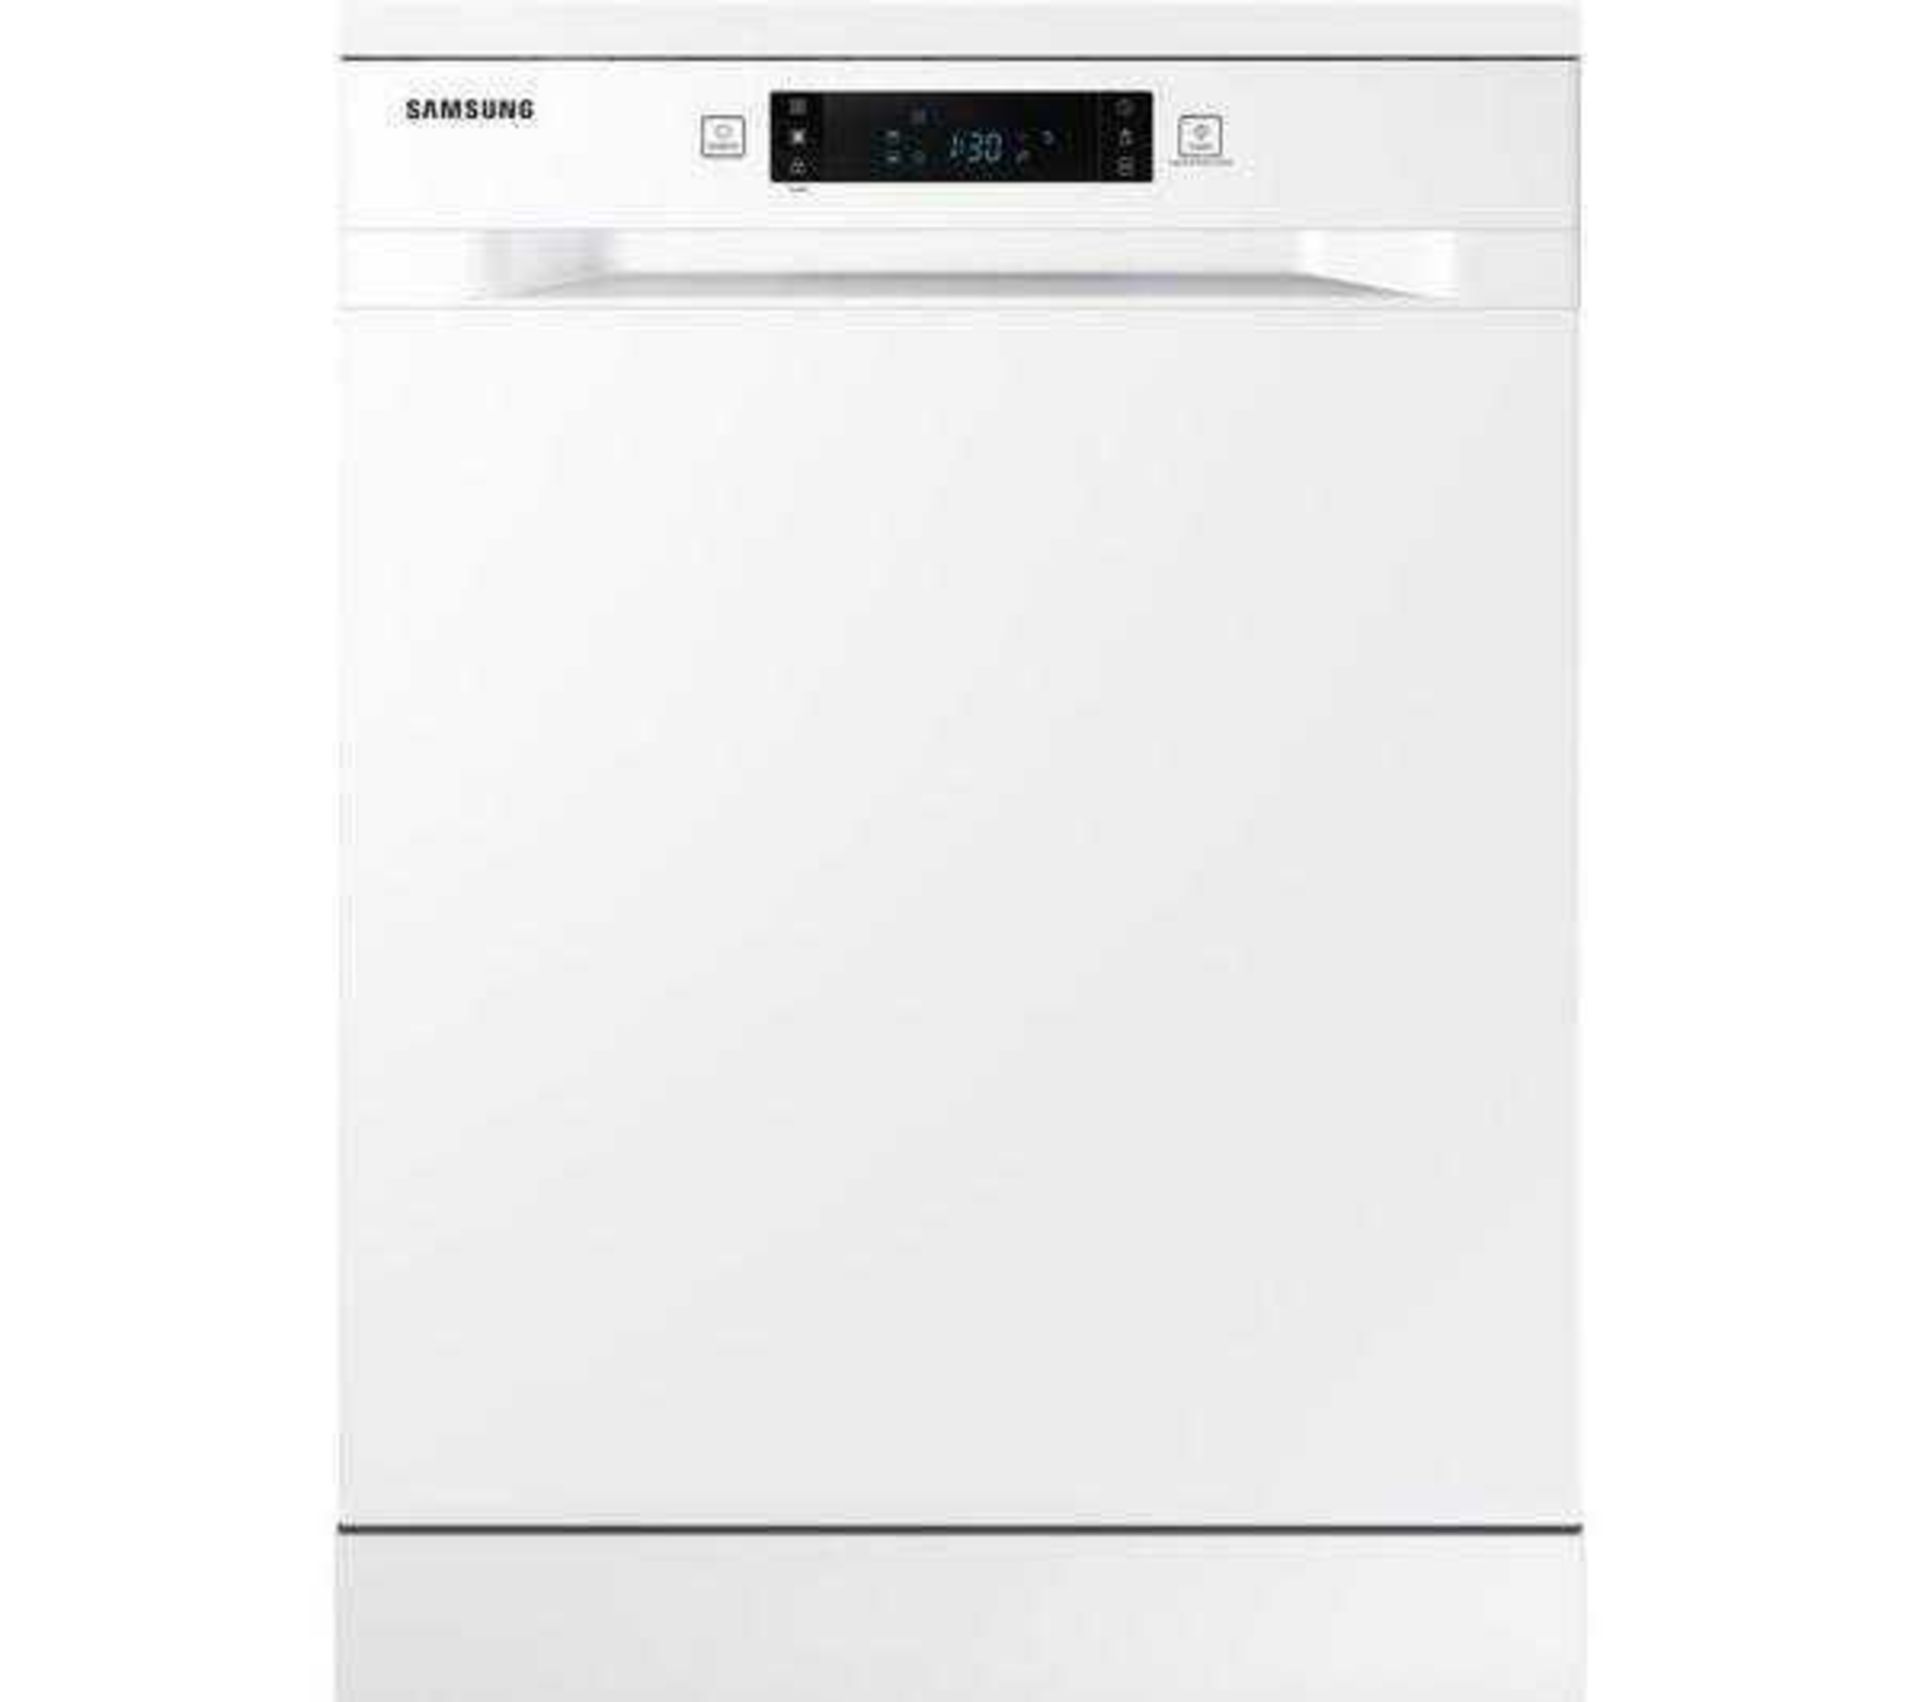 (Dd) RRP £ 650 Lot To Contain 1 Samsung Dw60A6092Fw/Eu Full-Size Dishwasher - White